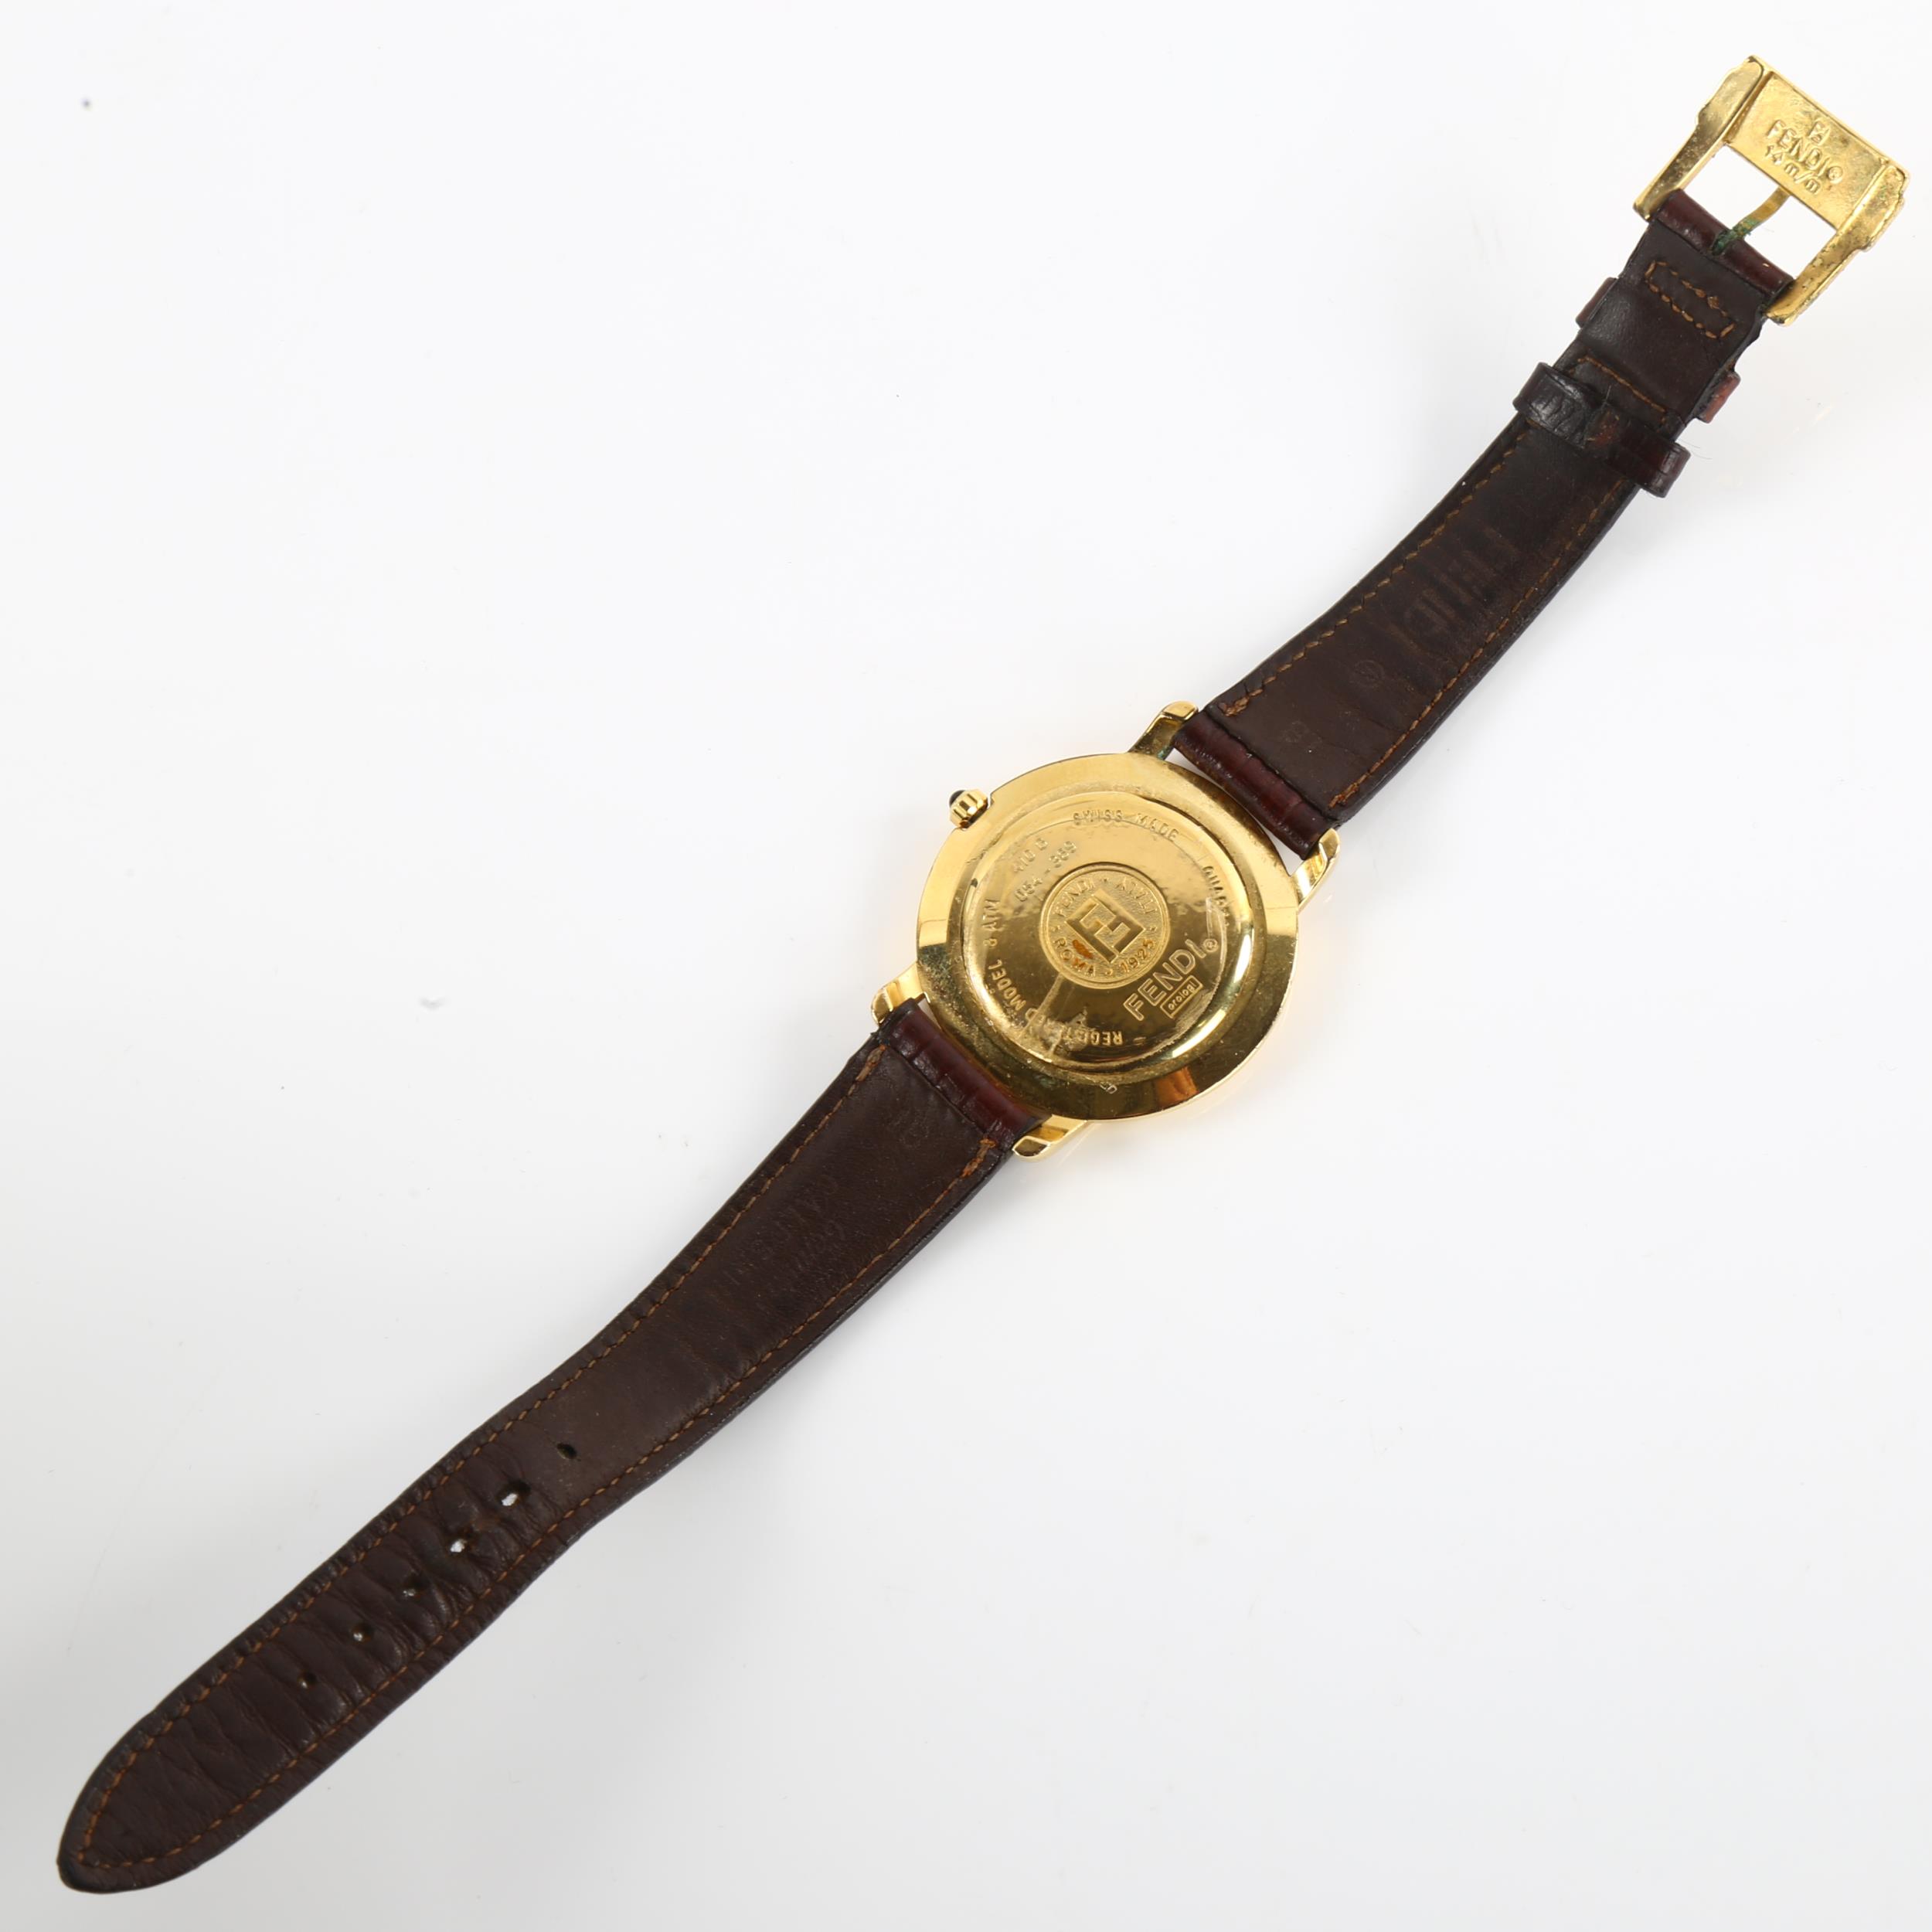 FENDI - a gold plated 410G quartz wristwatch, white dial with gilt Roman numeral hour markers, - Image 3 of 5